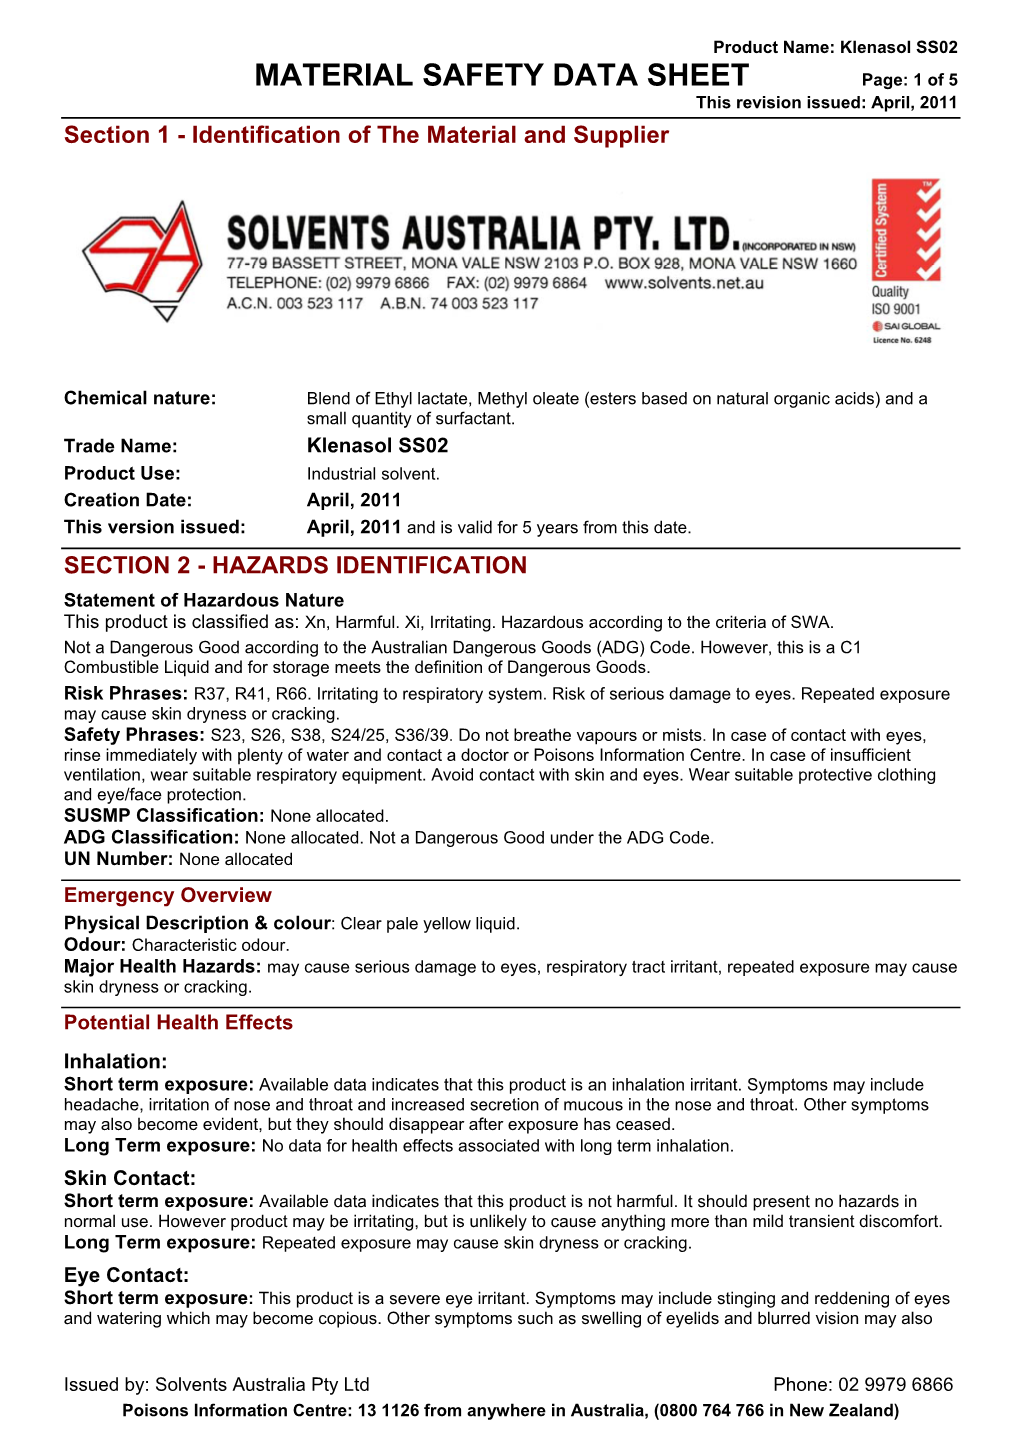 MATERIAL SAFETY DATA SHEET Page: 1 of 5 This Revision Issued: April, 2011 Section 1 - Identification of the Material and Supplier